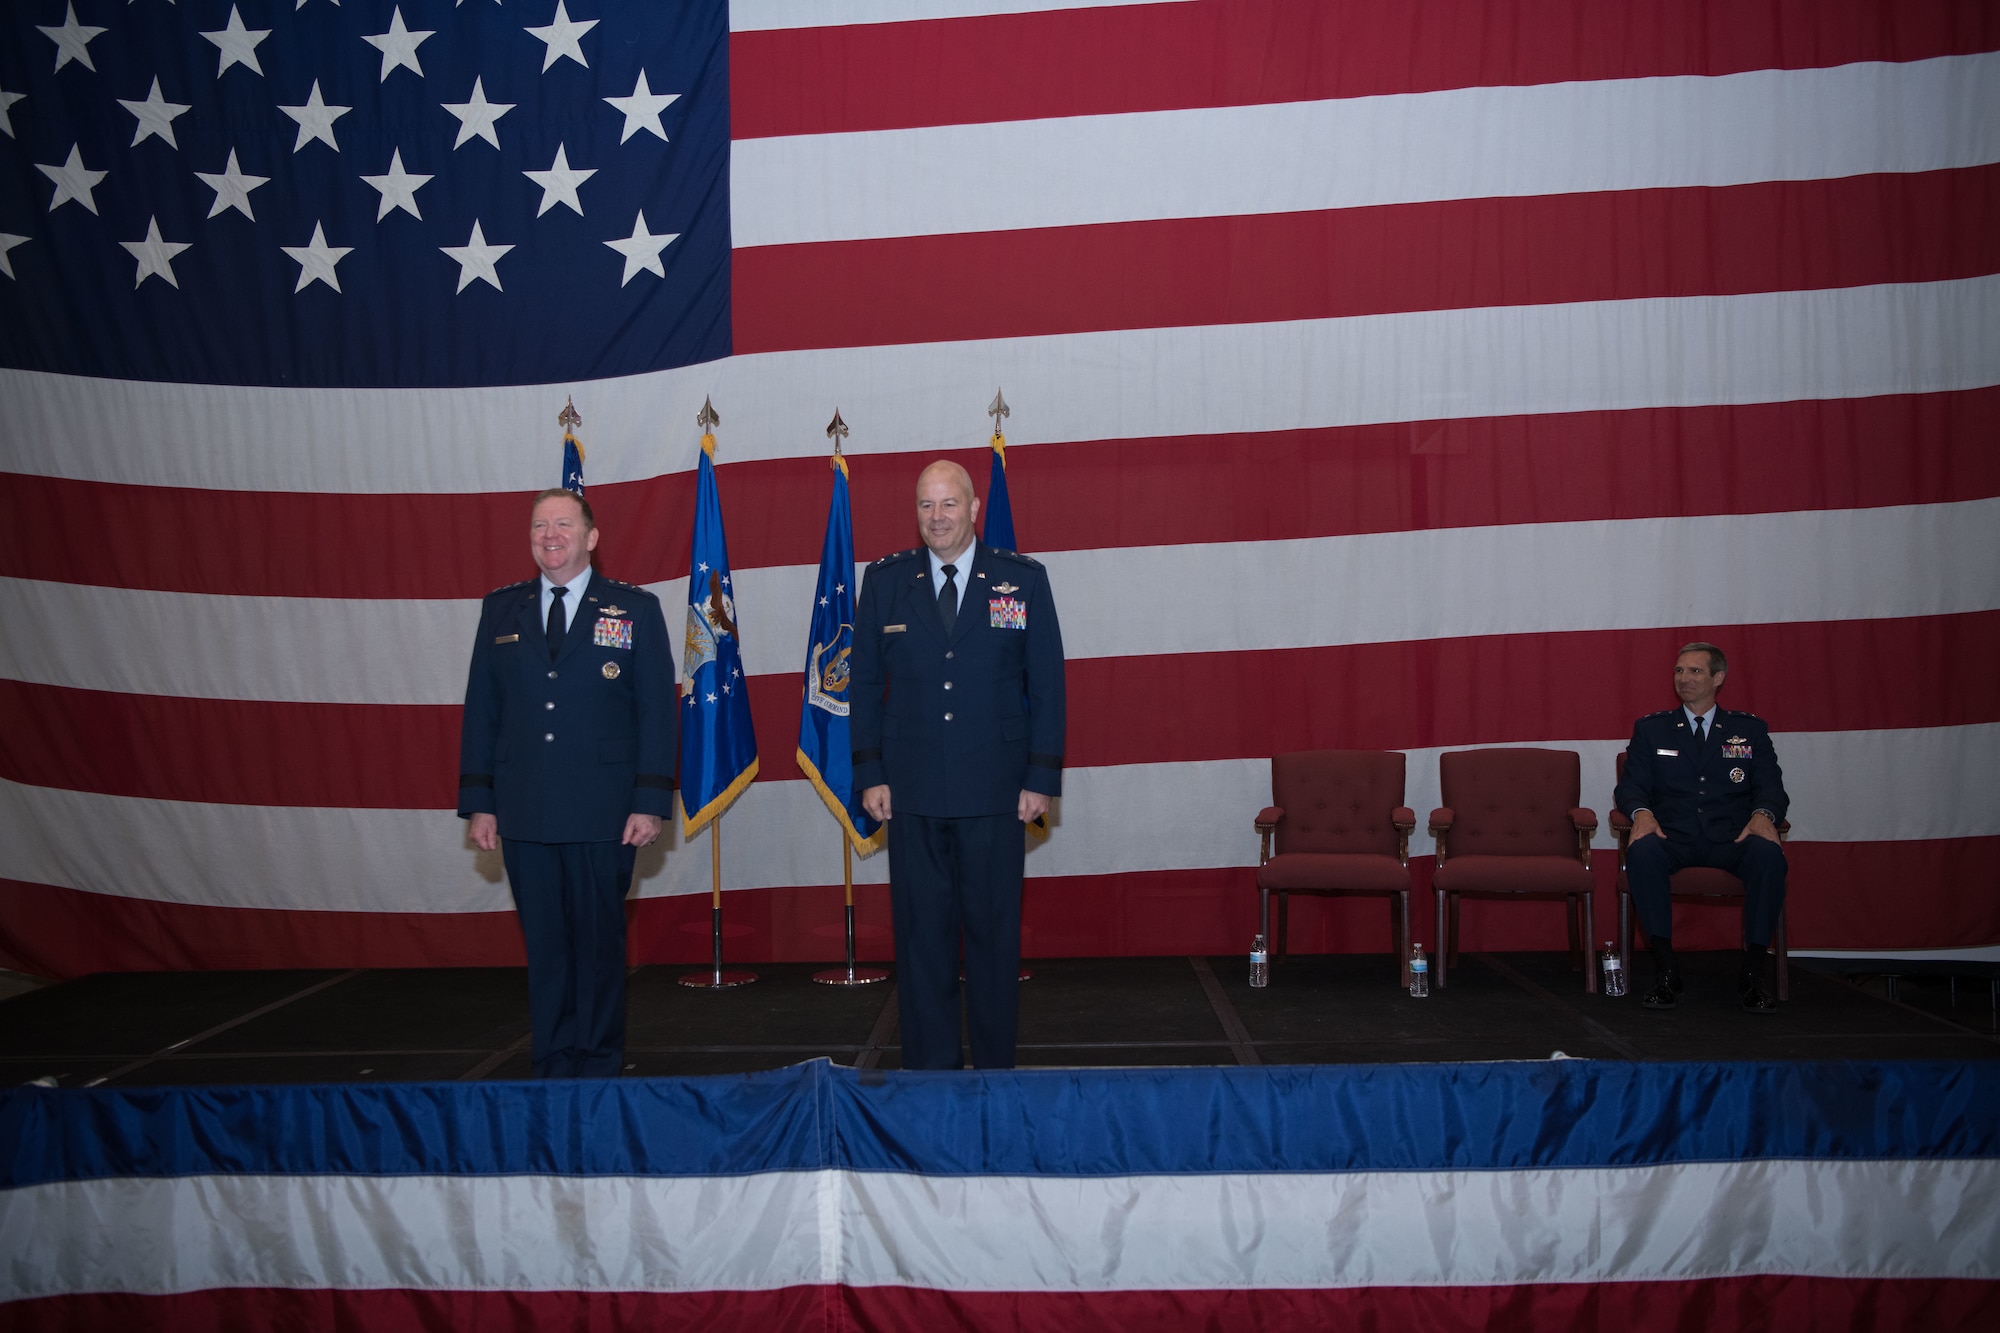 As part of the change of command ceremony, Lt. Gen. Richard Scobee presented Maj. Gen. Brian Borgen the Legion of Merit for his singularly distinctive accomplishments as the Commander, Tenth Air Force.